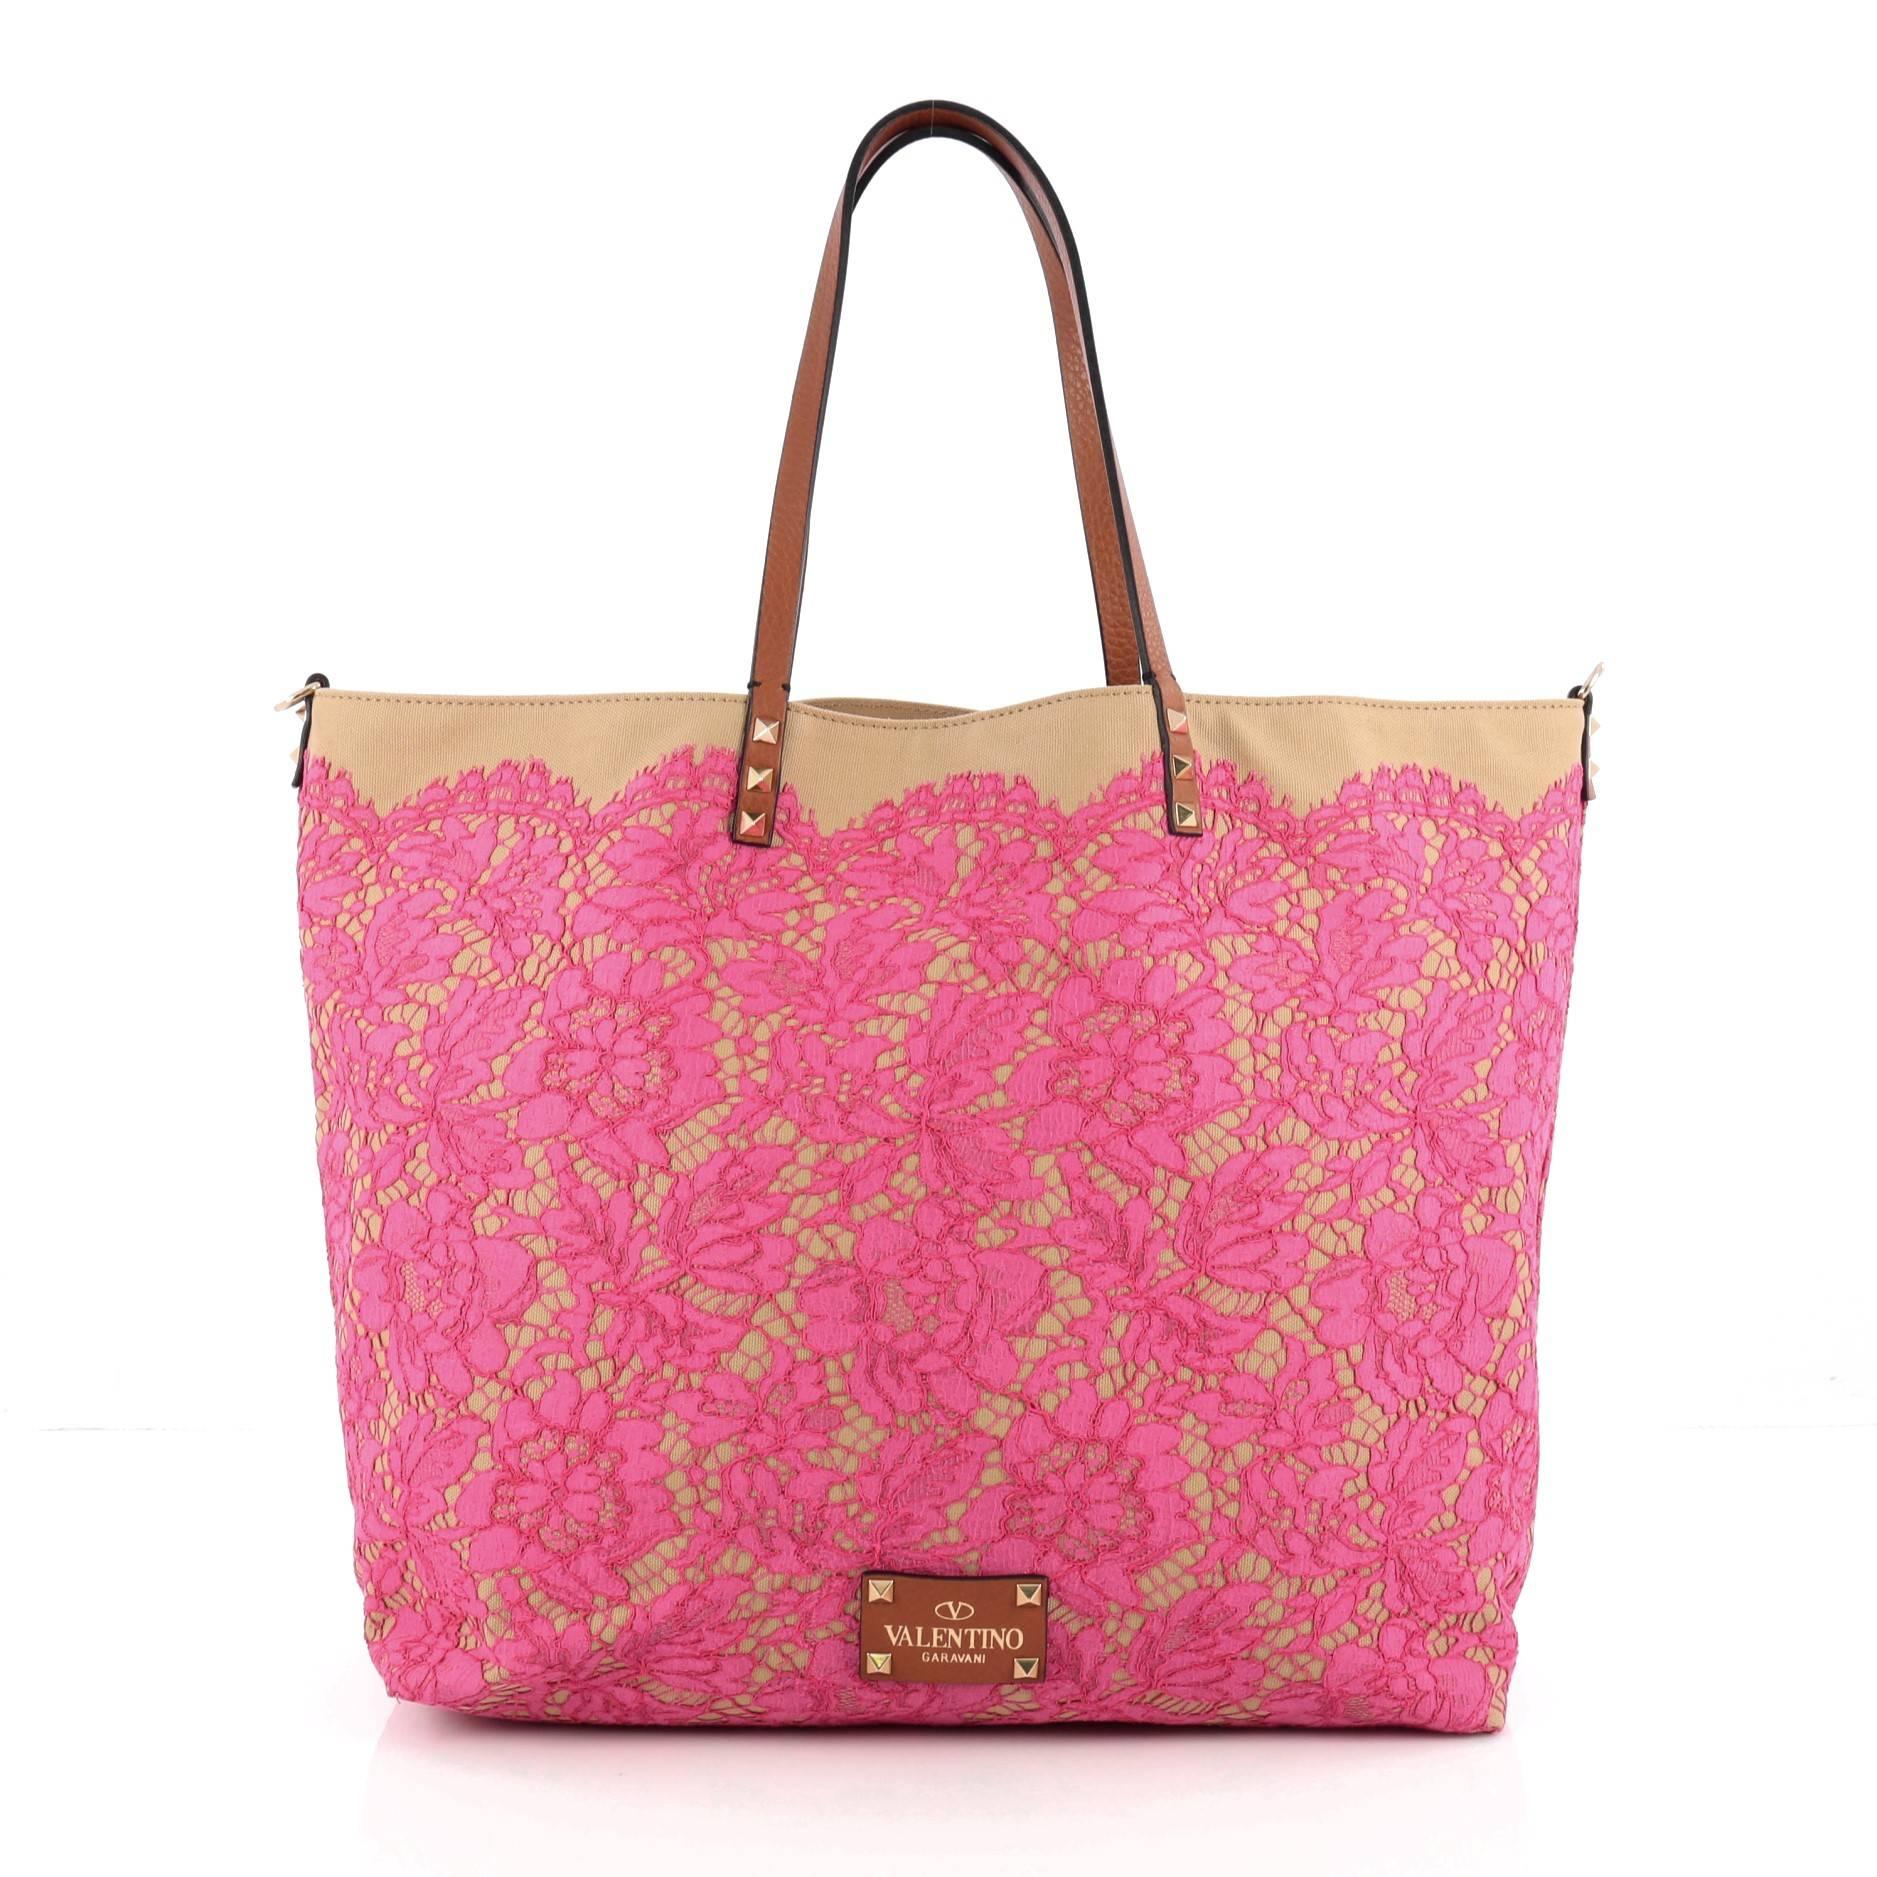 Pink Valentino Glam Rockstud Reversible Tote Lace and Canvas